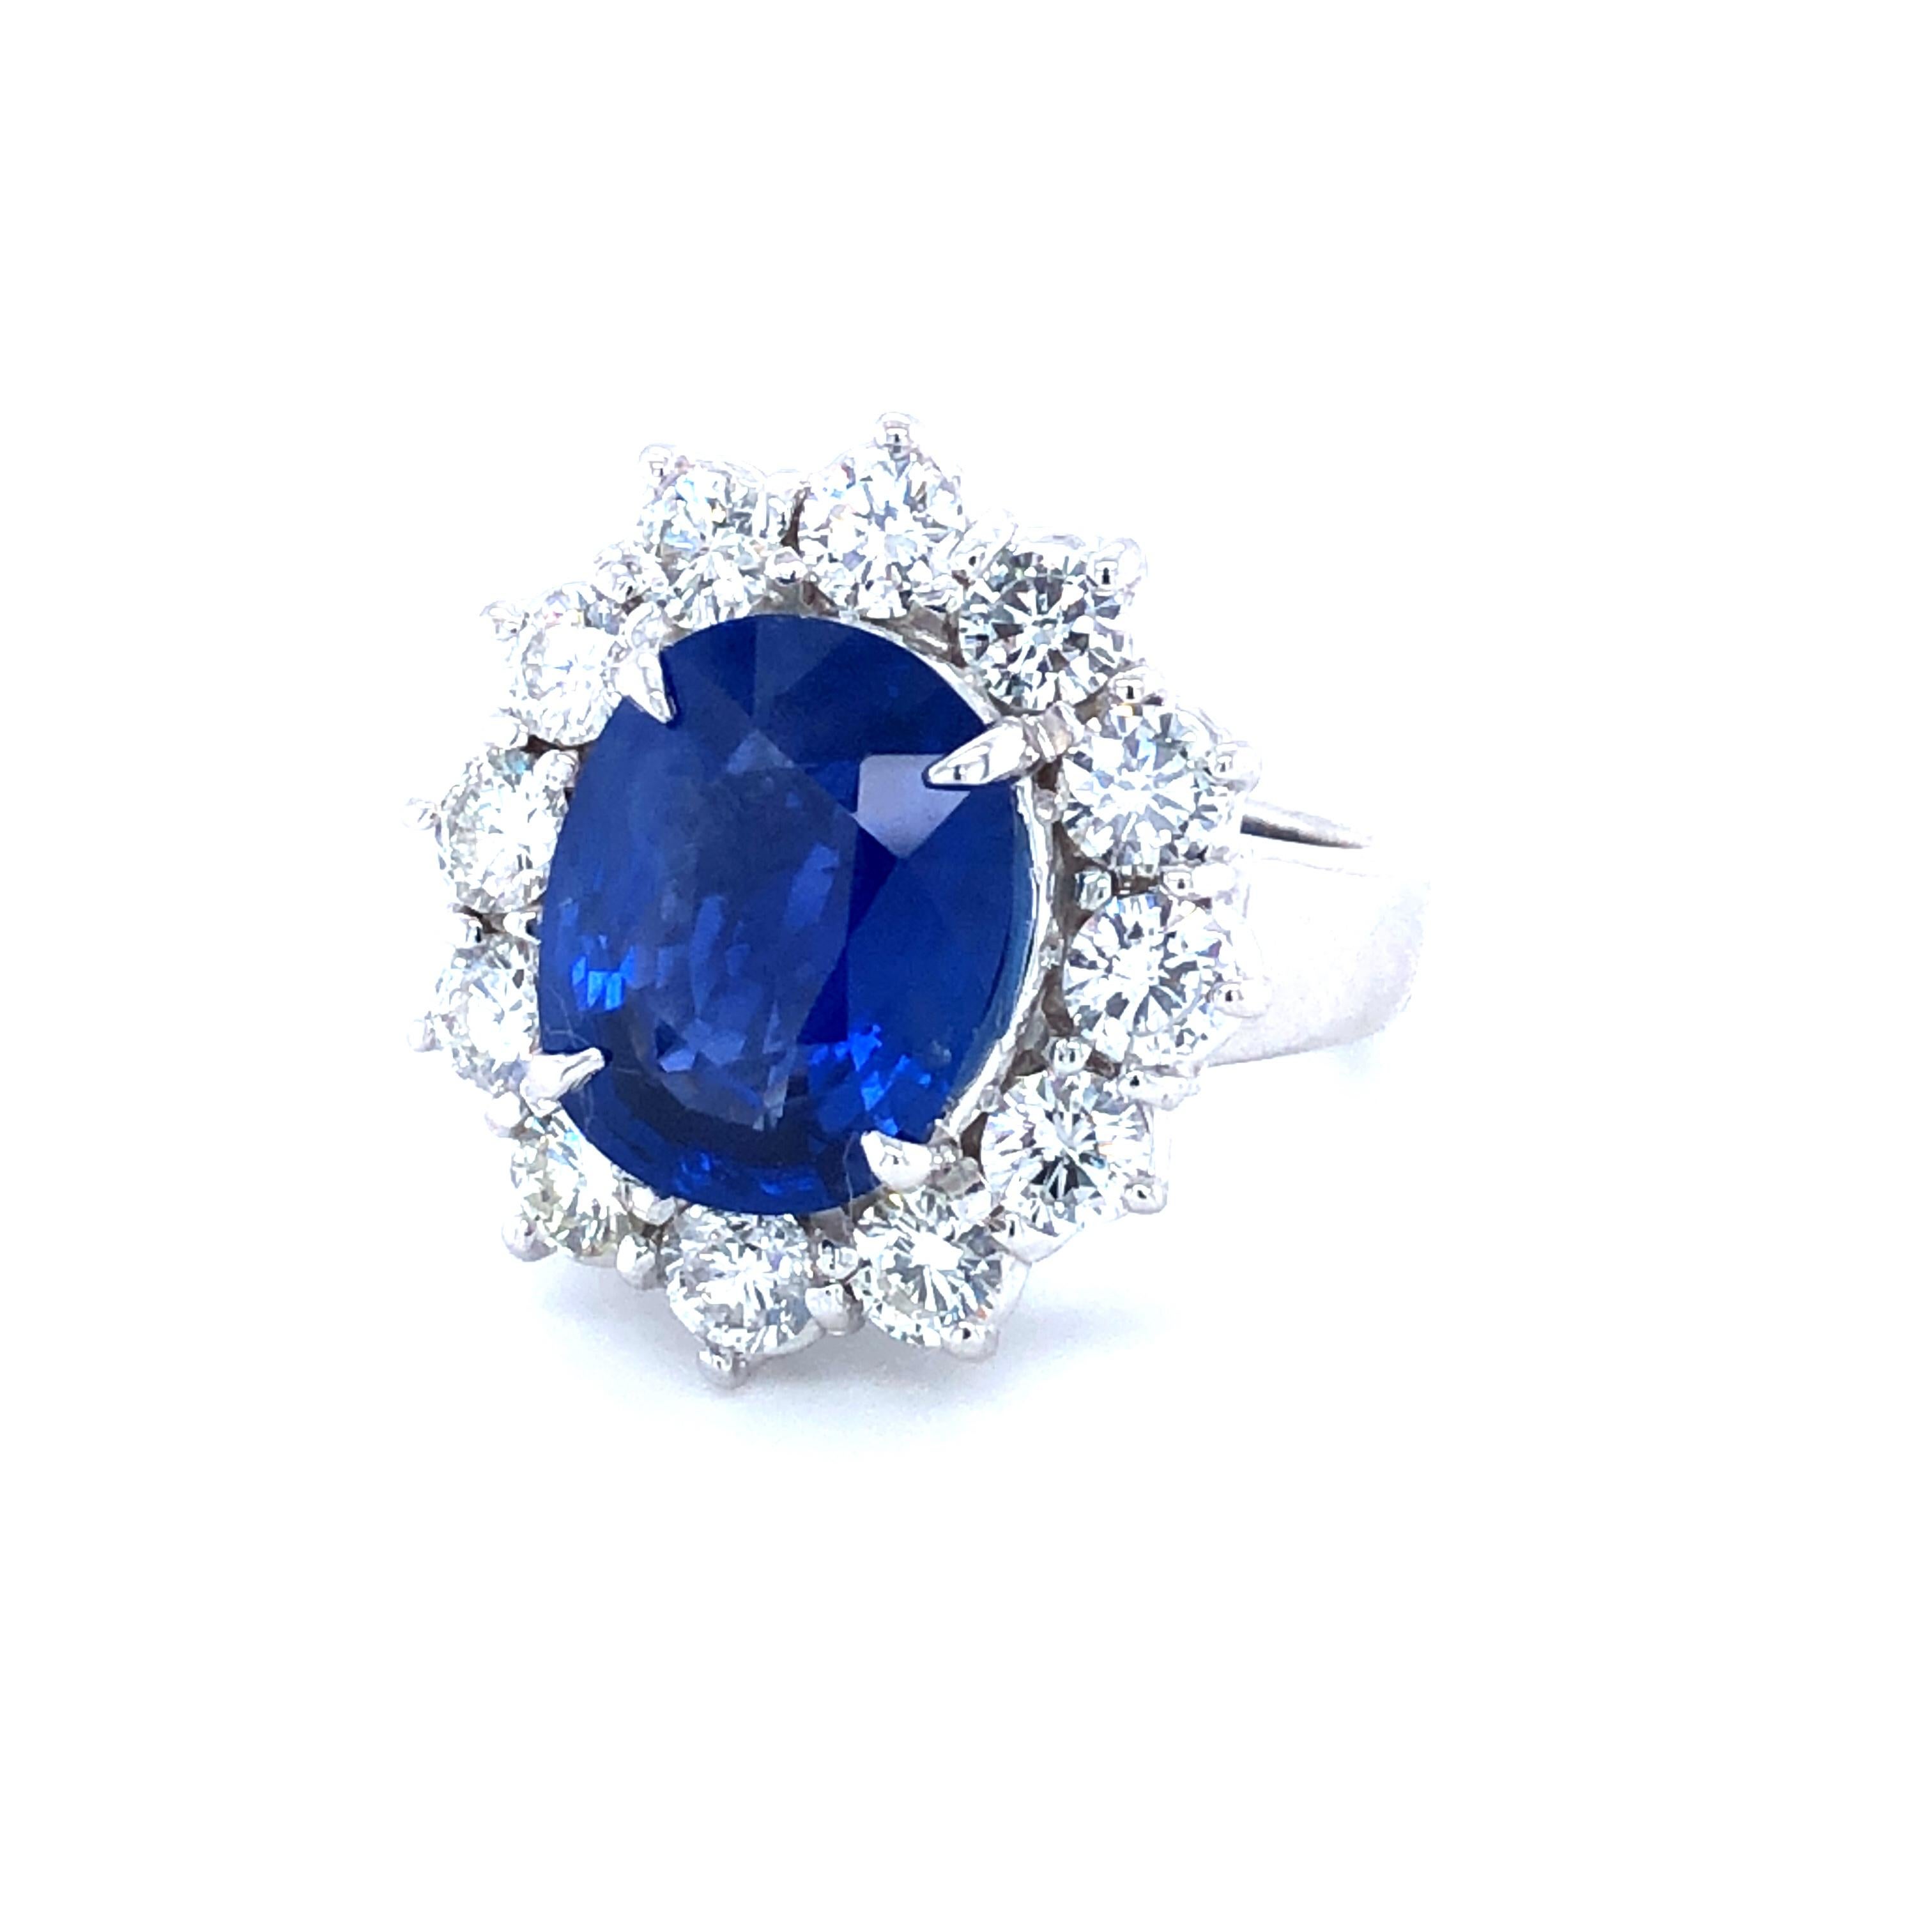 Offered here is a stunning sapphire and diamond 